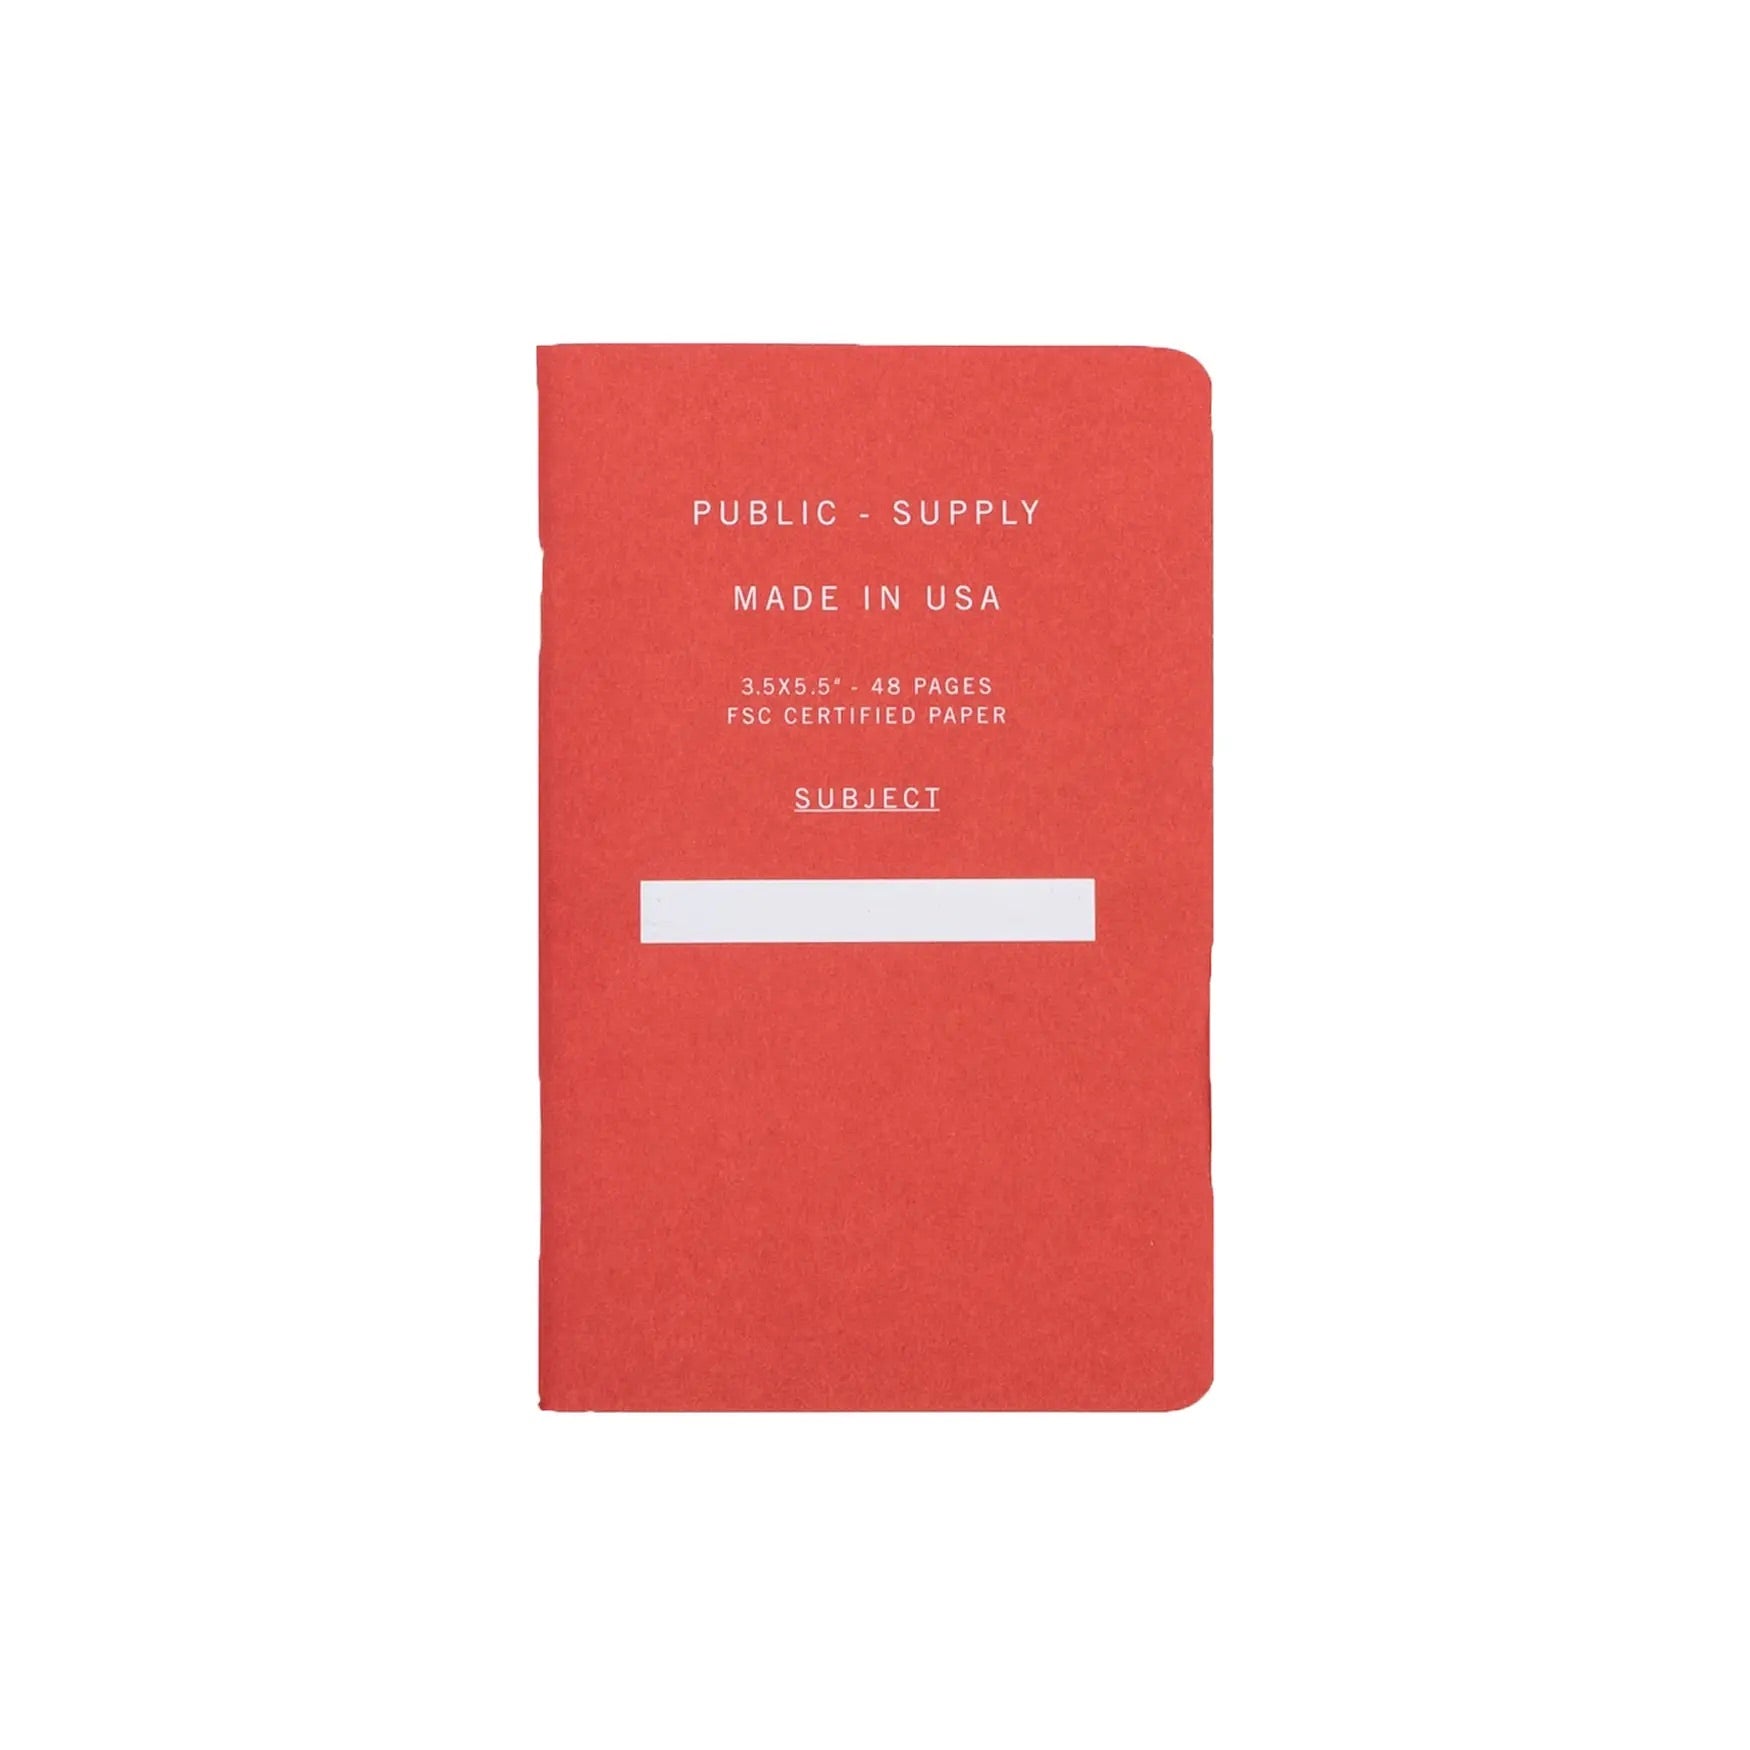 3.5X5.5" - Pocket Notebook - Soft Cover (Dotted)